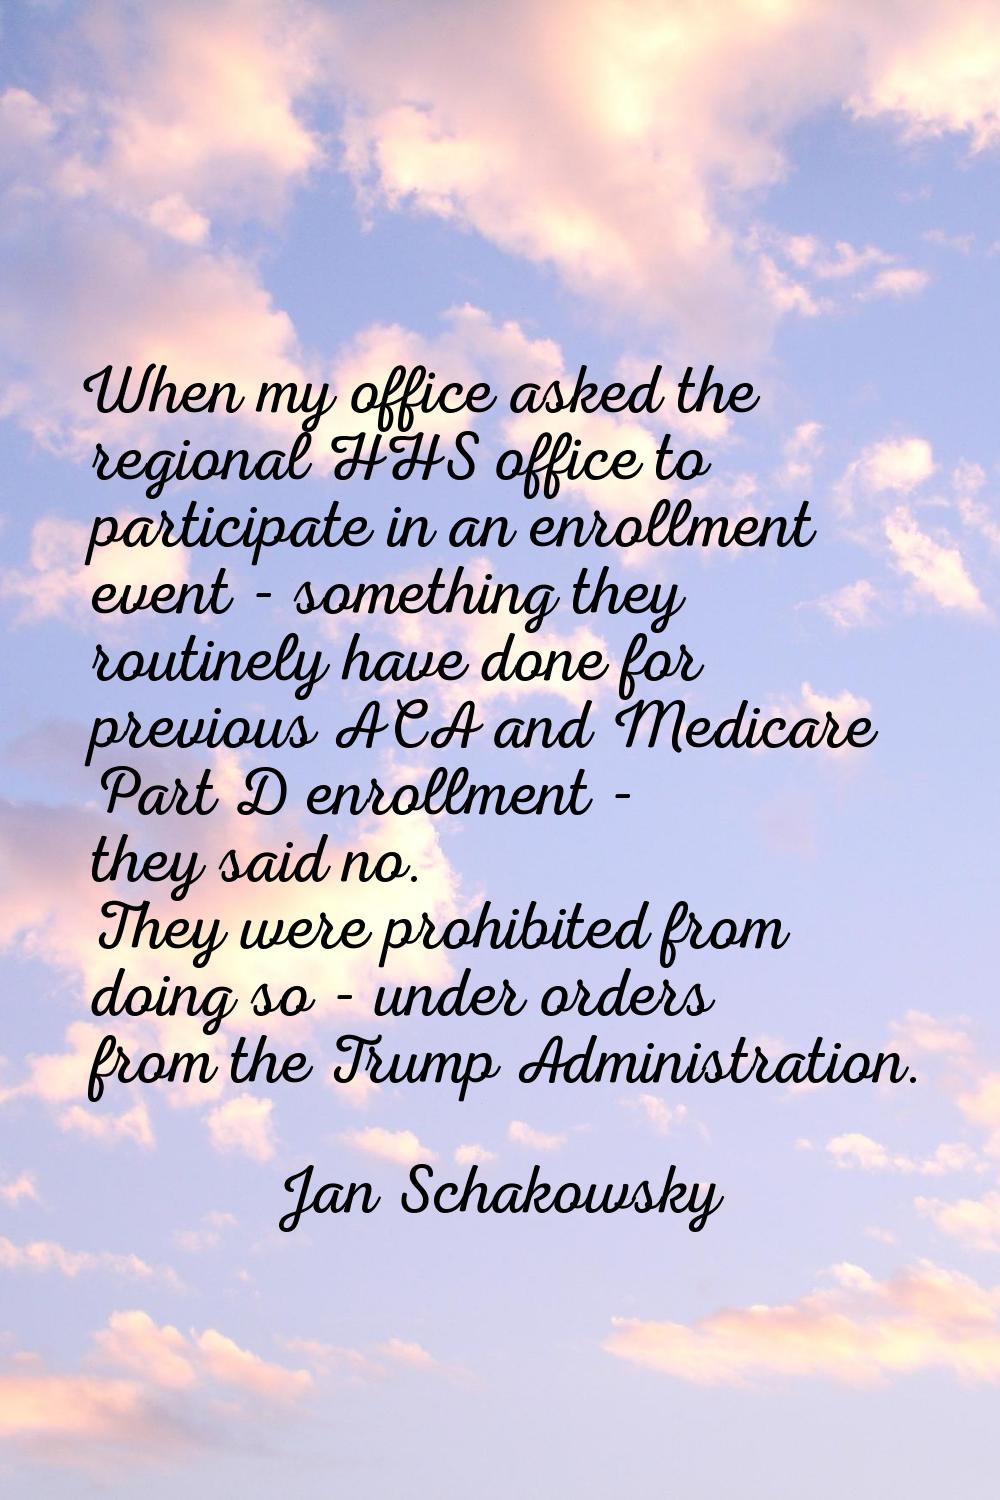 When my office asked the regional HHS office to participate in an enrollment event - something they